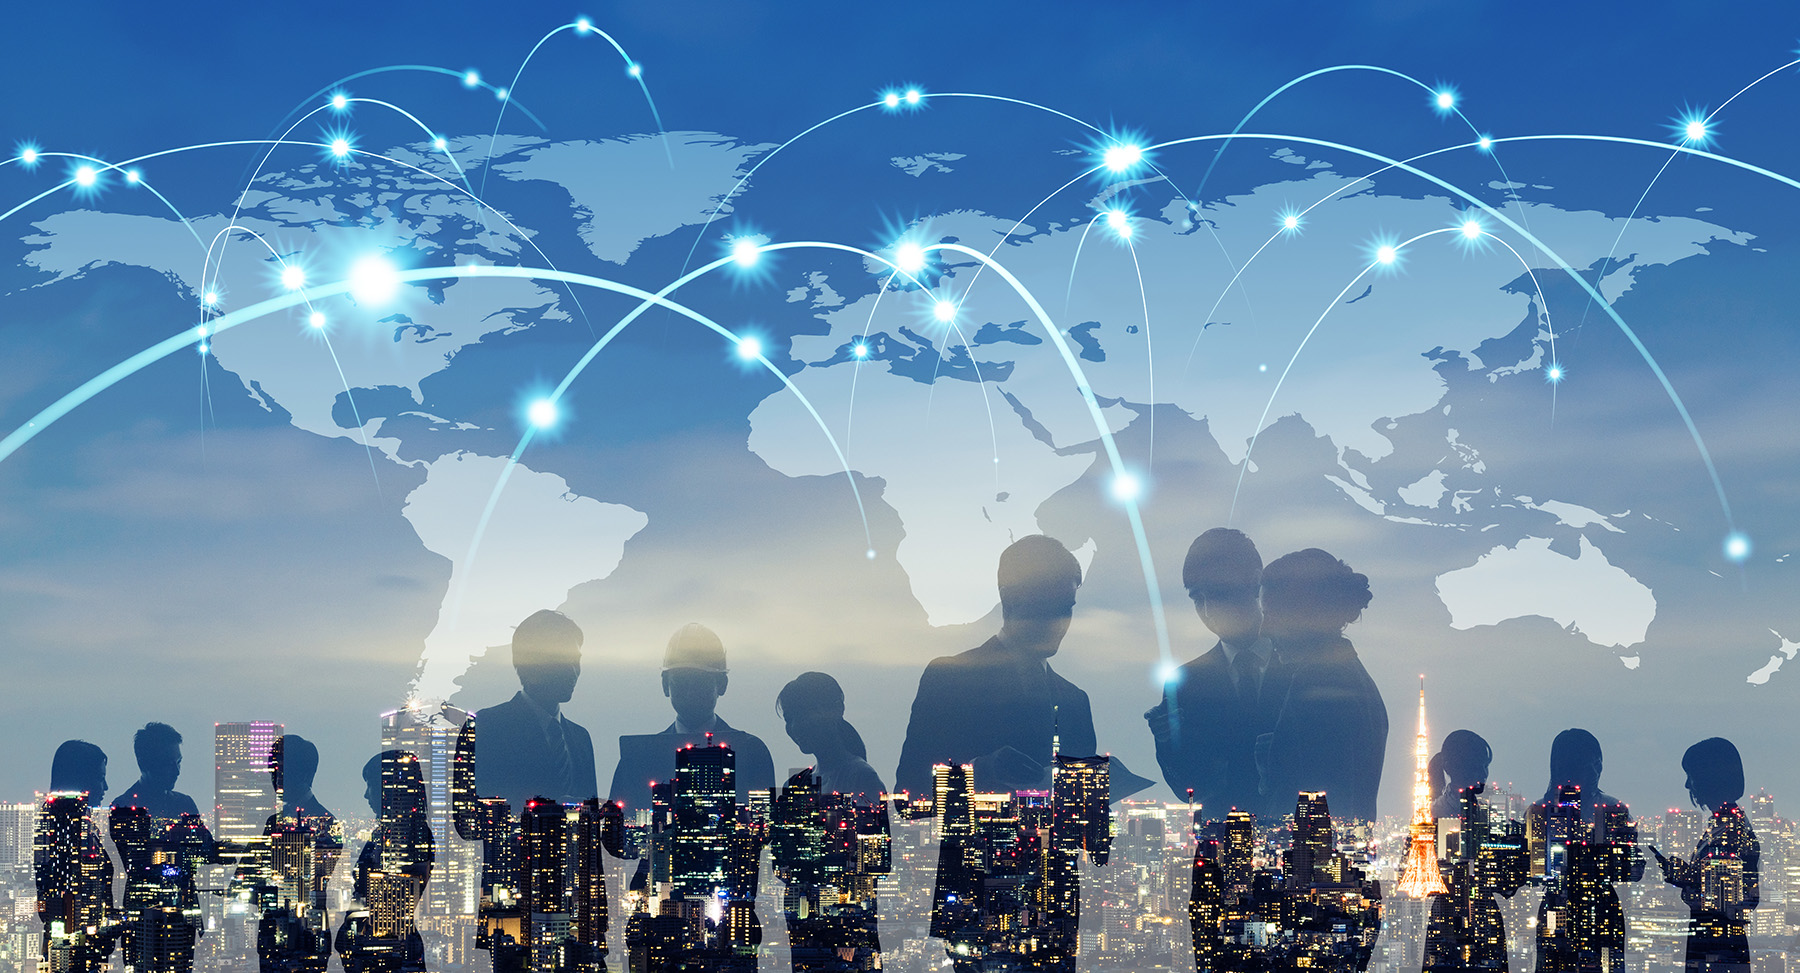 A composite image juxtaposes a map of the world with arc lines and highlighted locations stretching from country to country, along with a skyline and silhouettes of executives. 